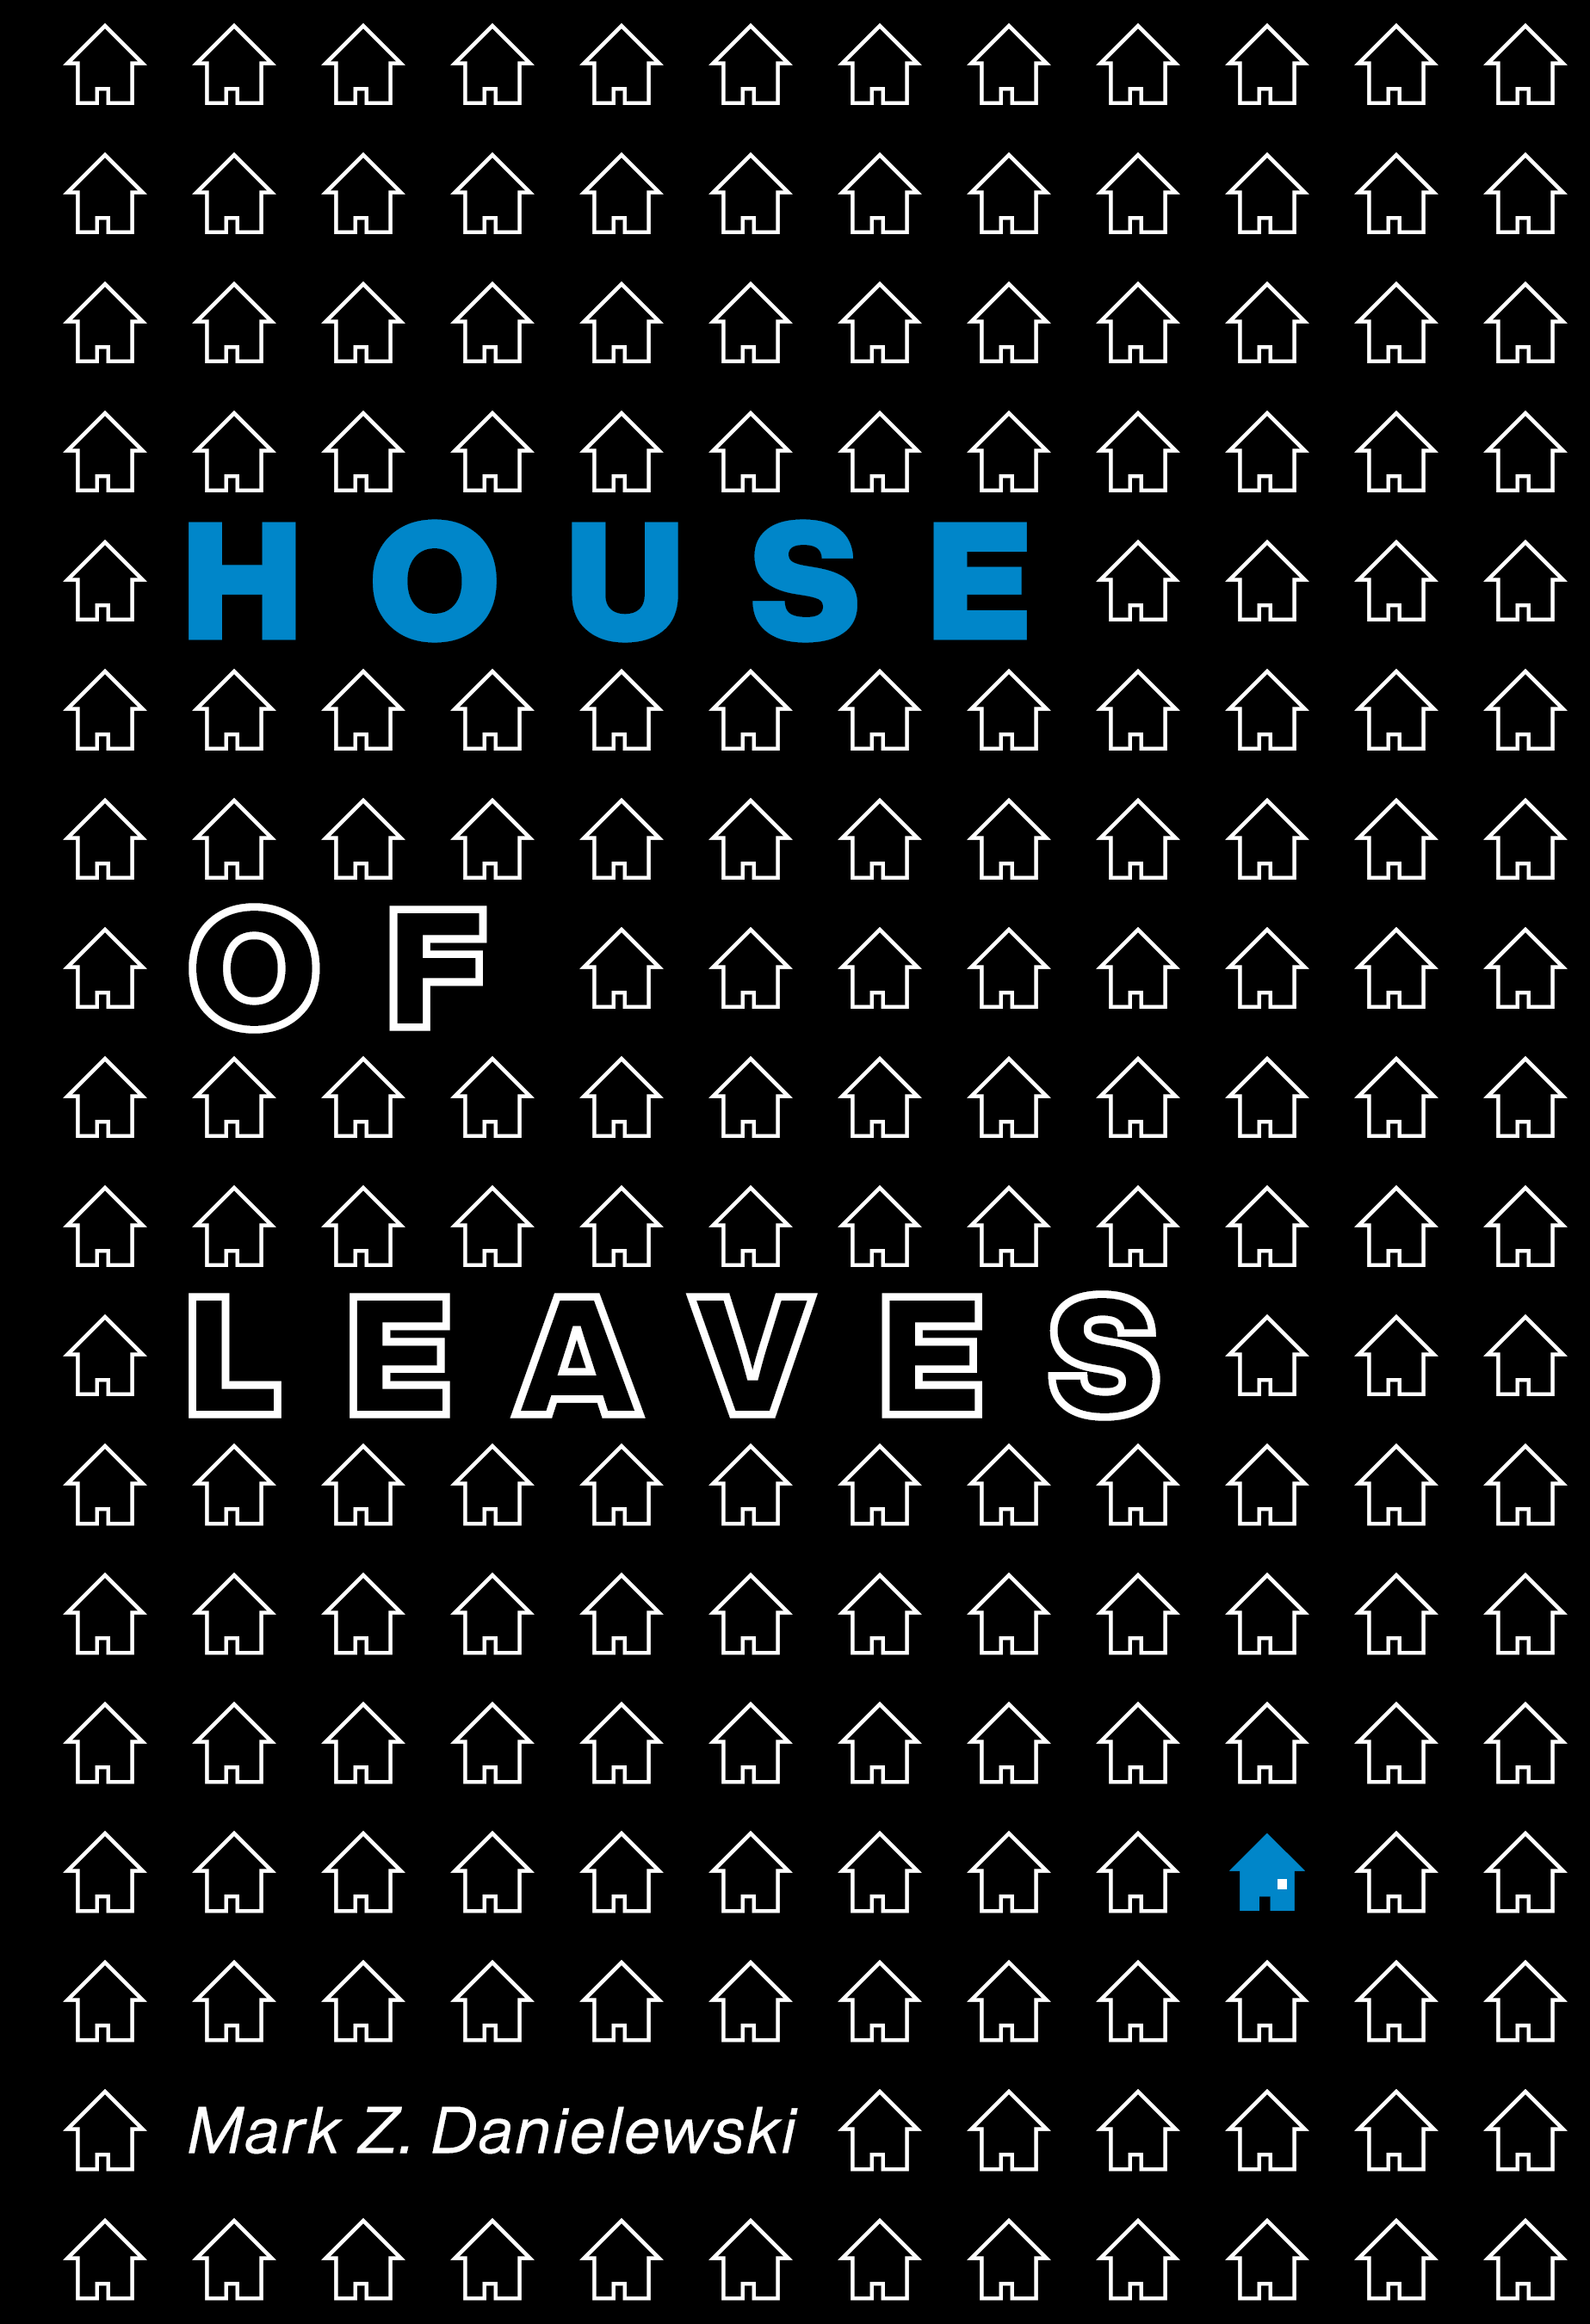 A book cover for the book House of Leaves, by Mark Z. Danielewski. The cover is black with small white houses on it. One house is blue.